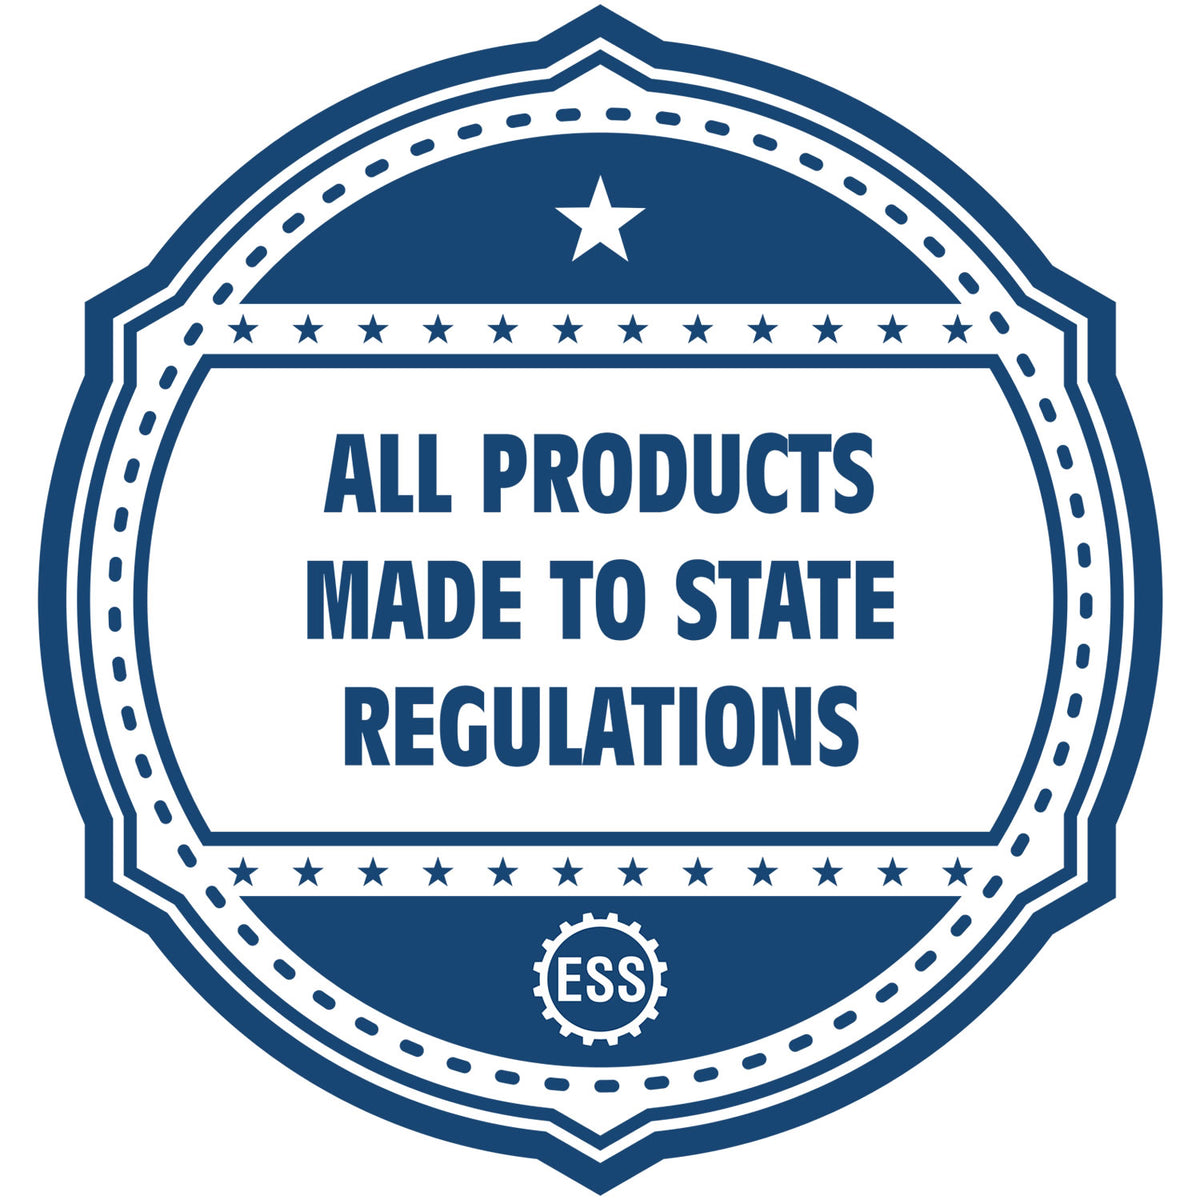 A blue icon or badge for the Heavy Duty Cast Iron South Carolina Geologist Seal Embosser showing that this product is made in compliance with state regulations.